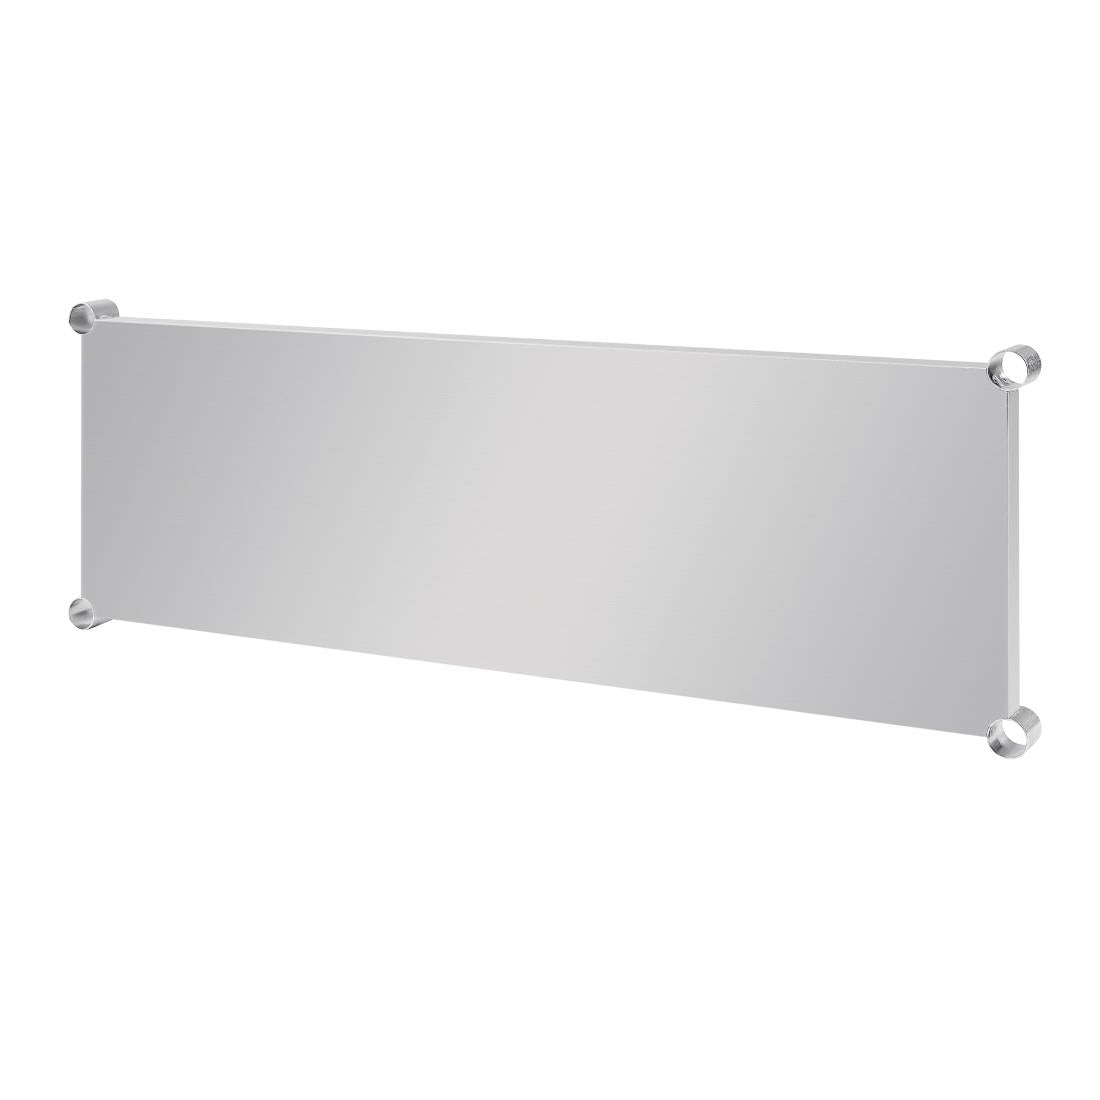 CP833 Vogue Steel Table Shelf 1500x600mm JD Catering Equipment Solutions Ltd